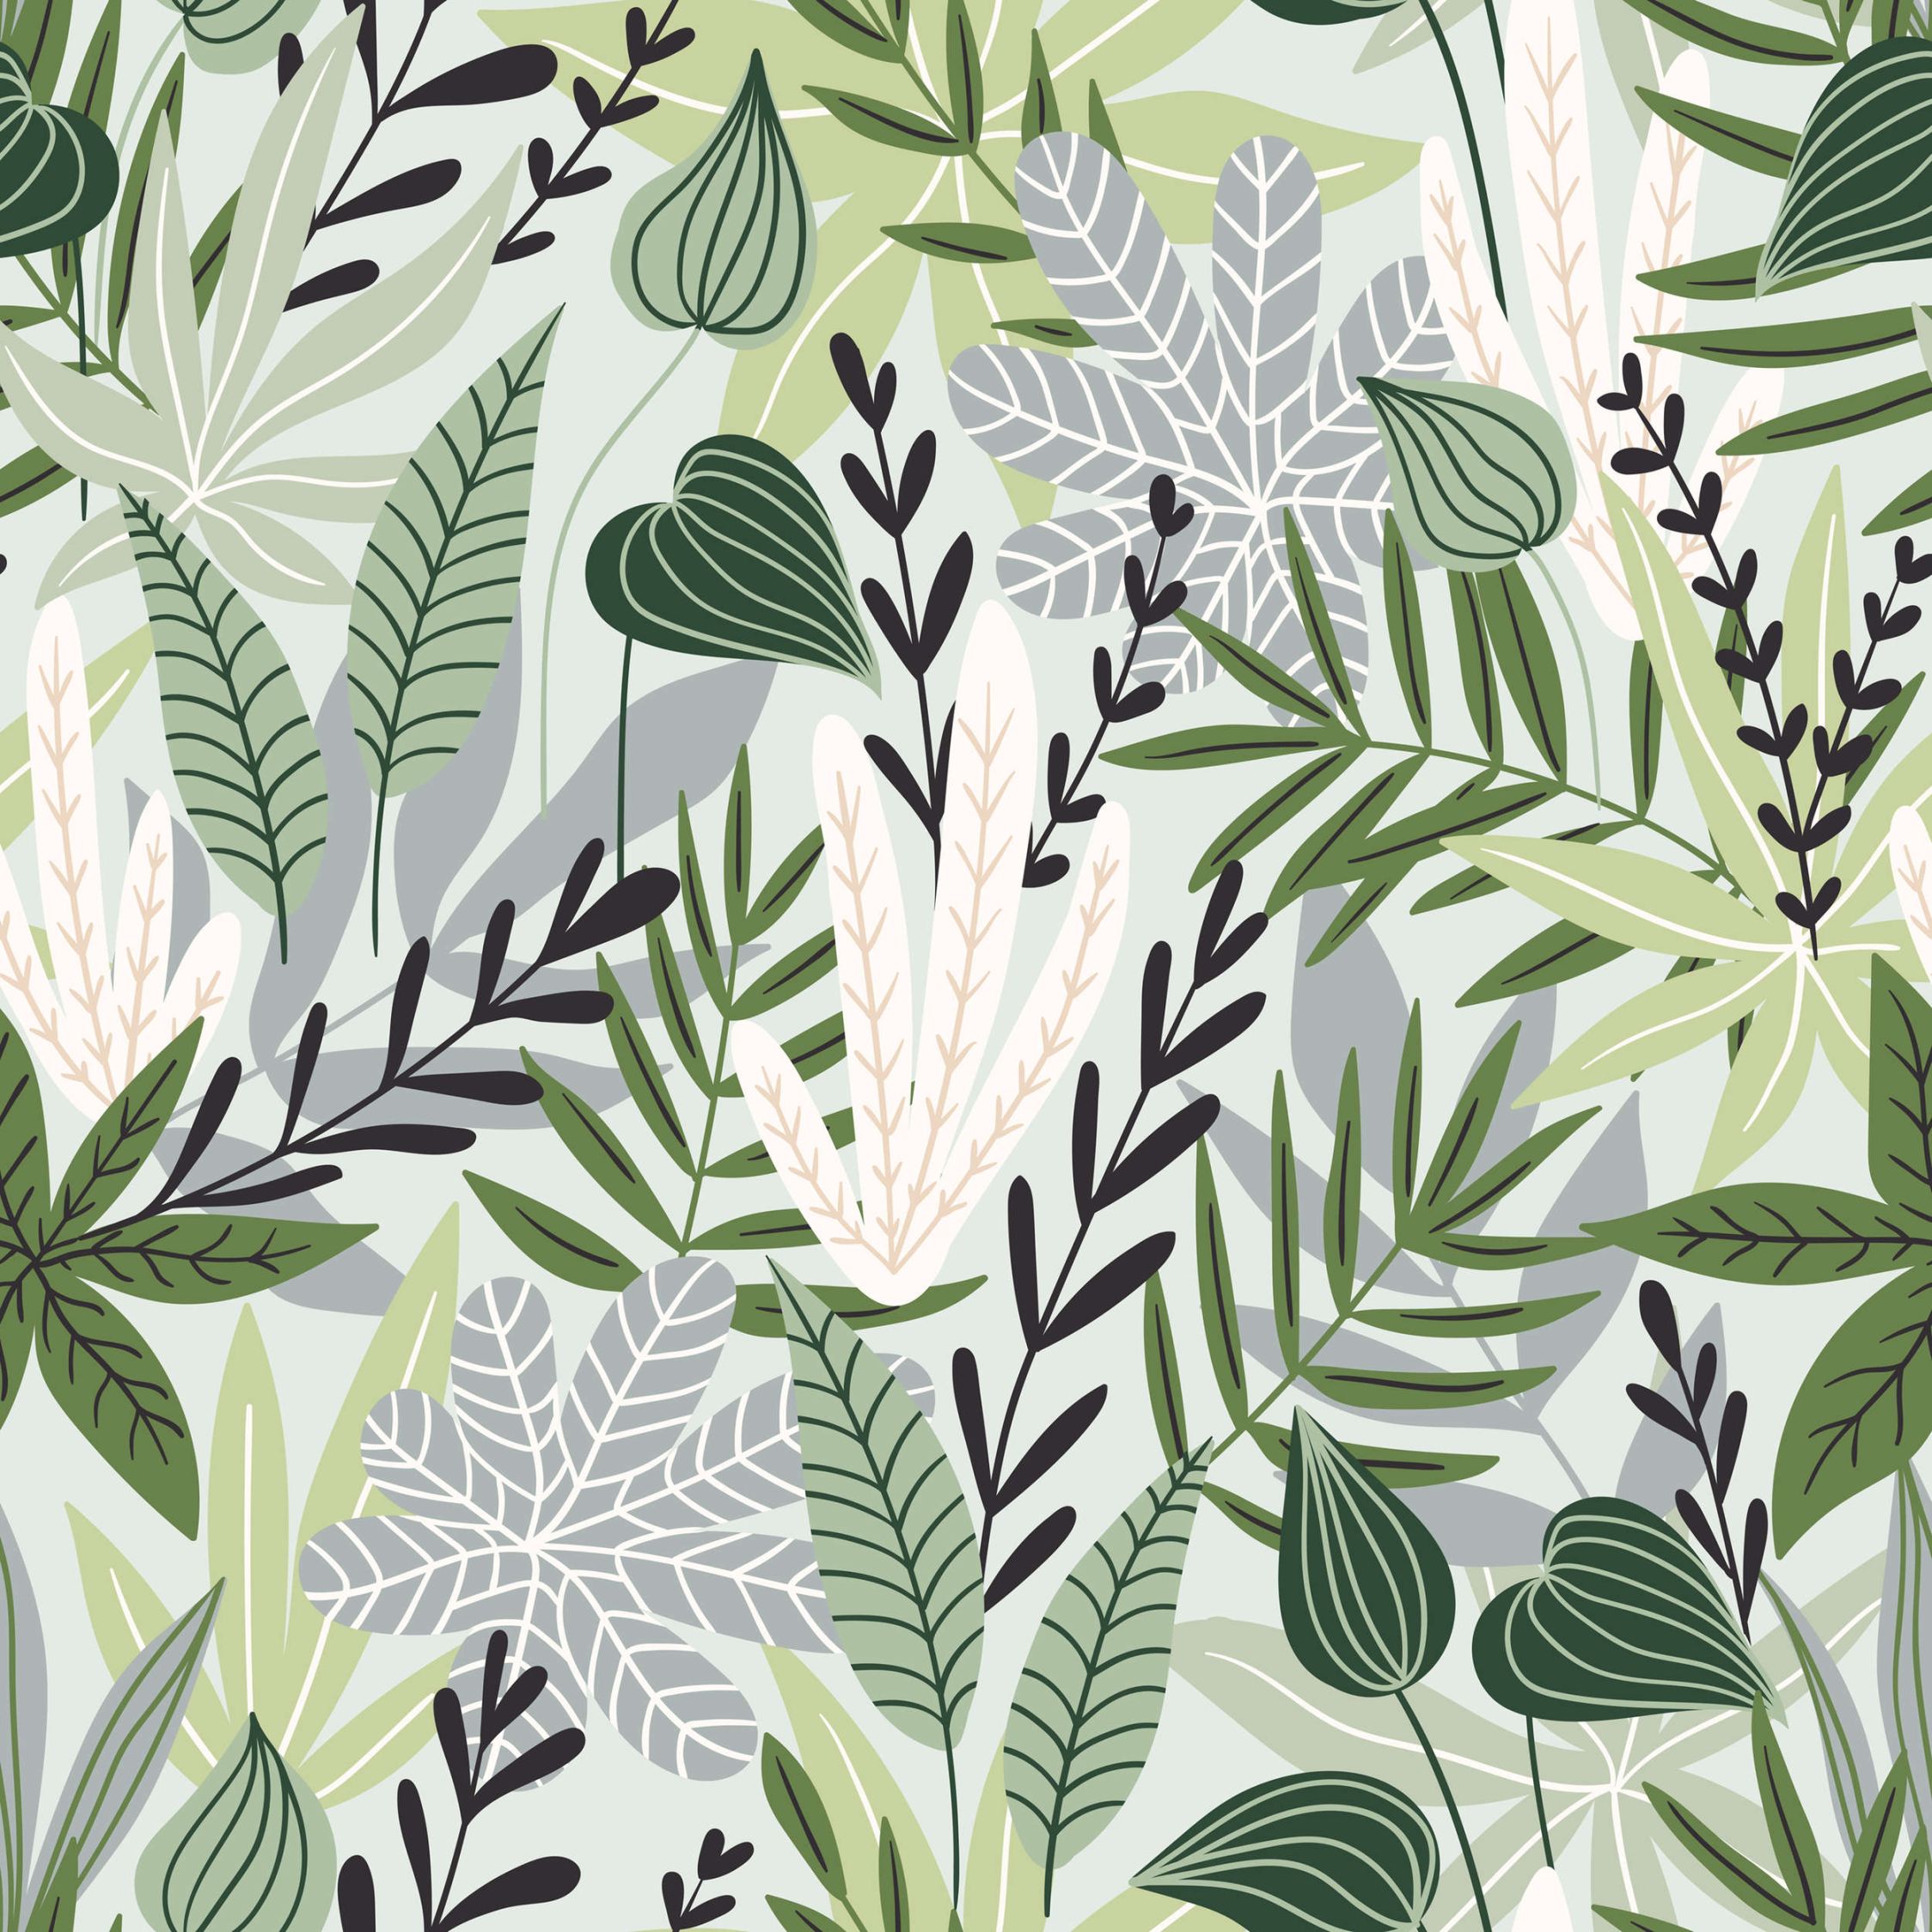             Photo wallpaper Leaves and grasses in comic style - Smooth & slightly shiny non-woven
        